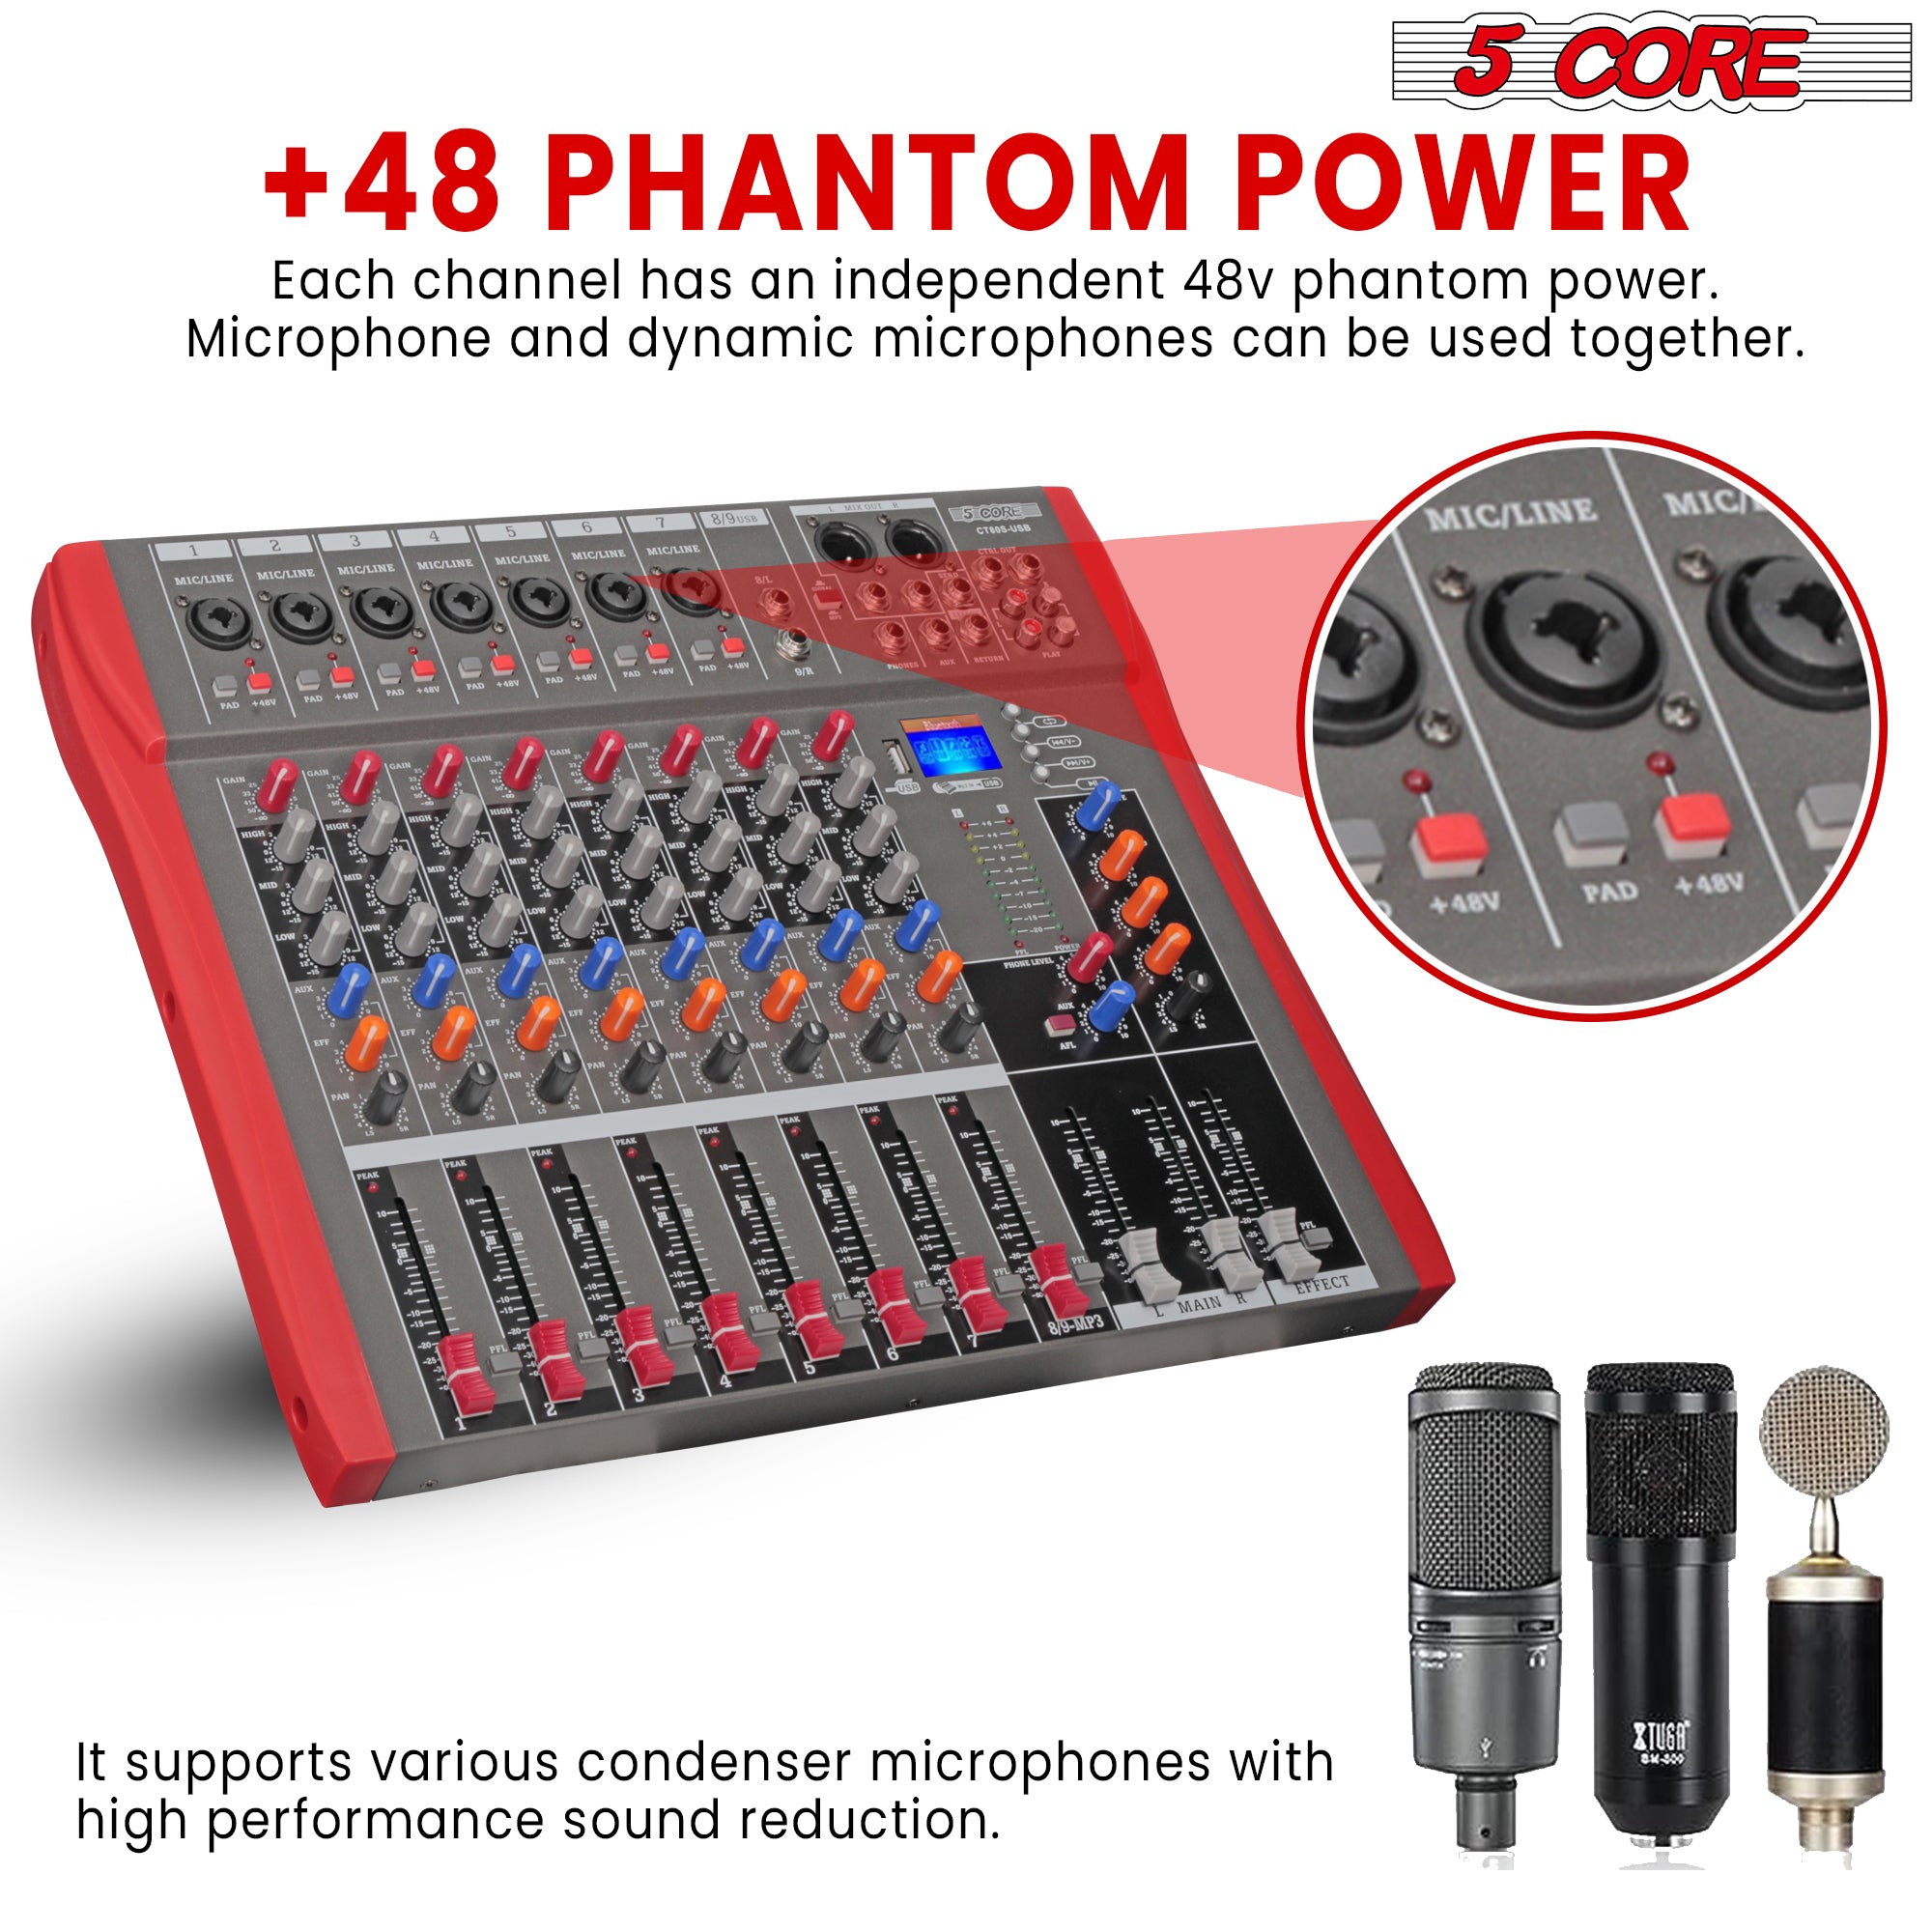 Audio mixer 8 channel has an independent +48v phantom power.